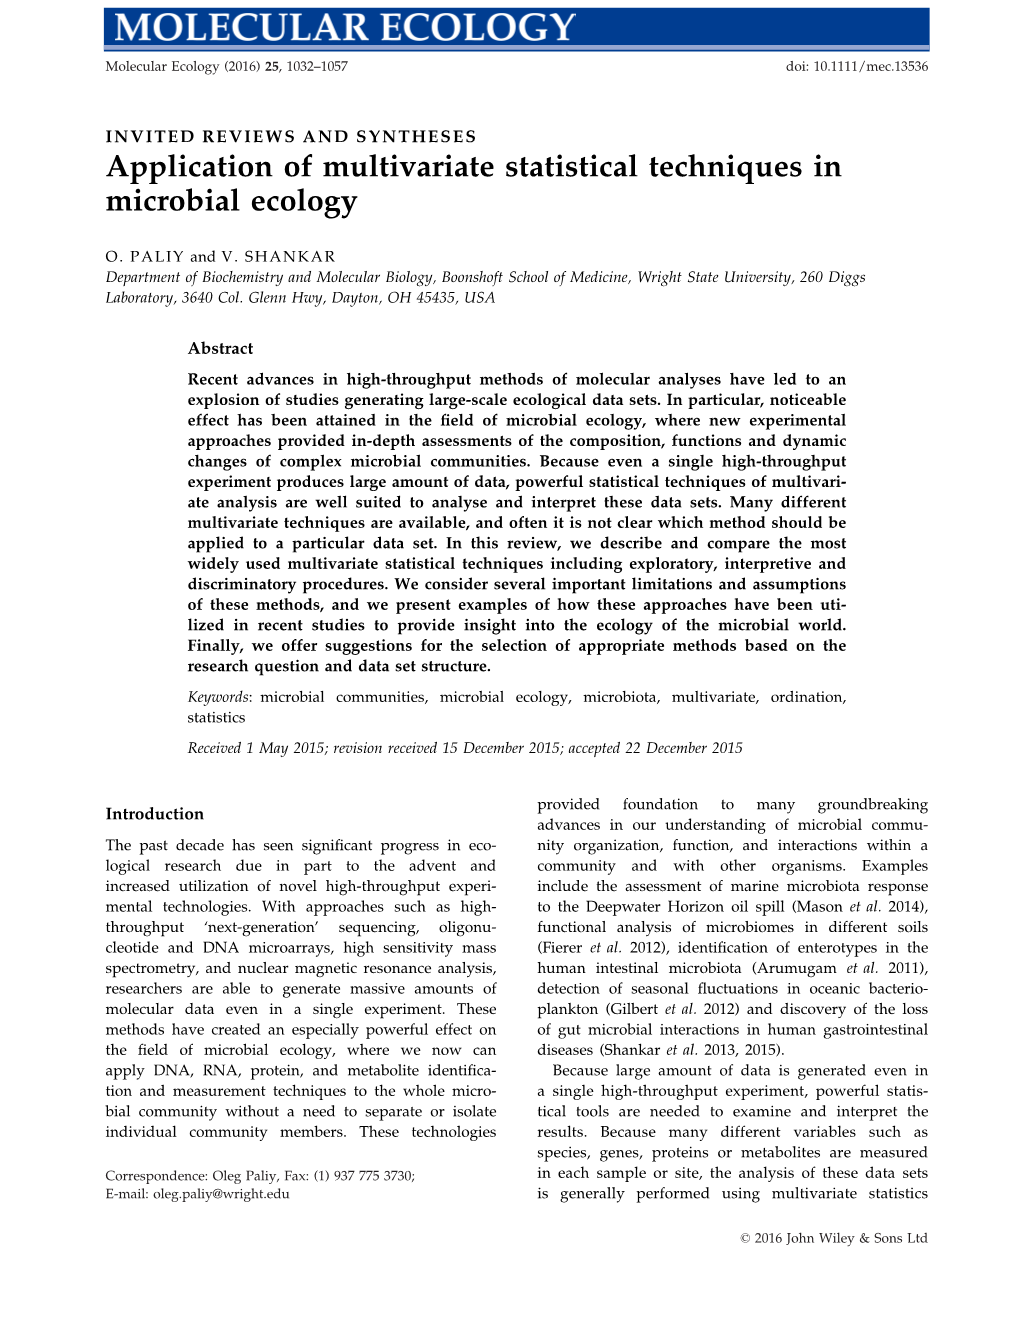 Application of Multivariate Statistical Techniques in Microbial Ecology